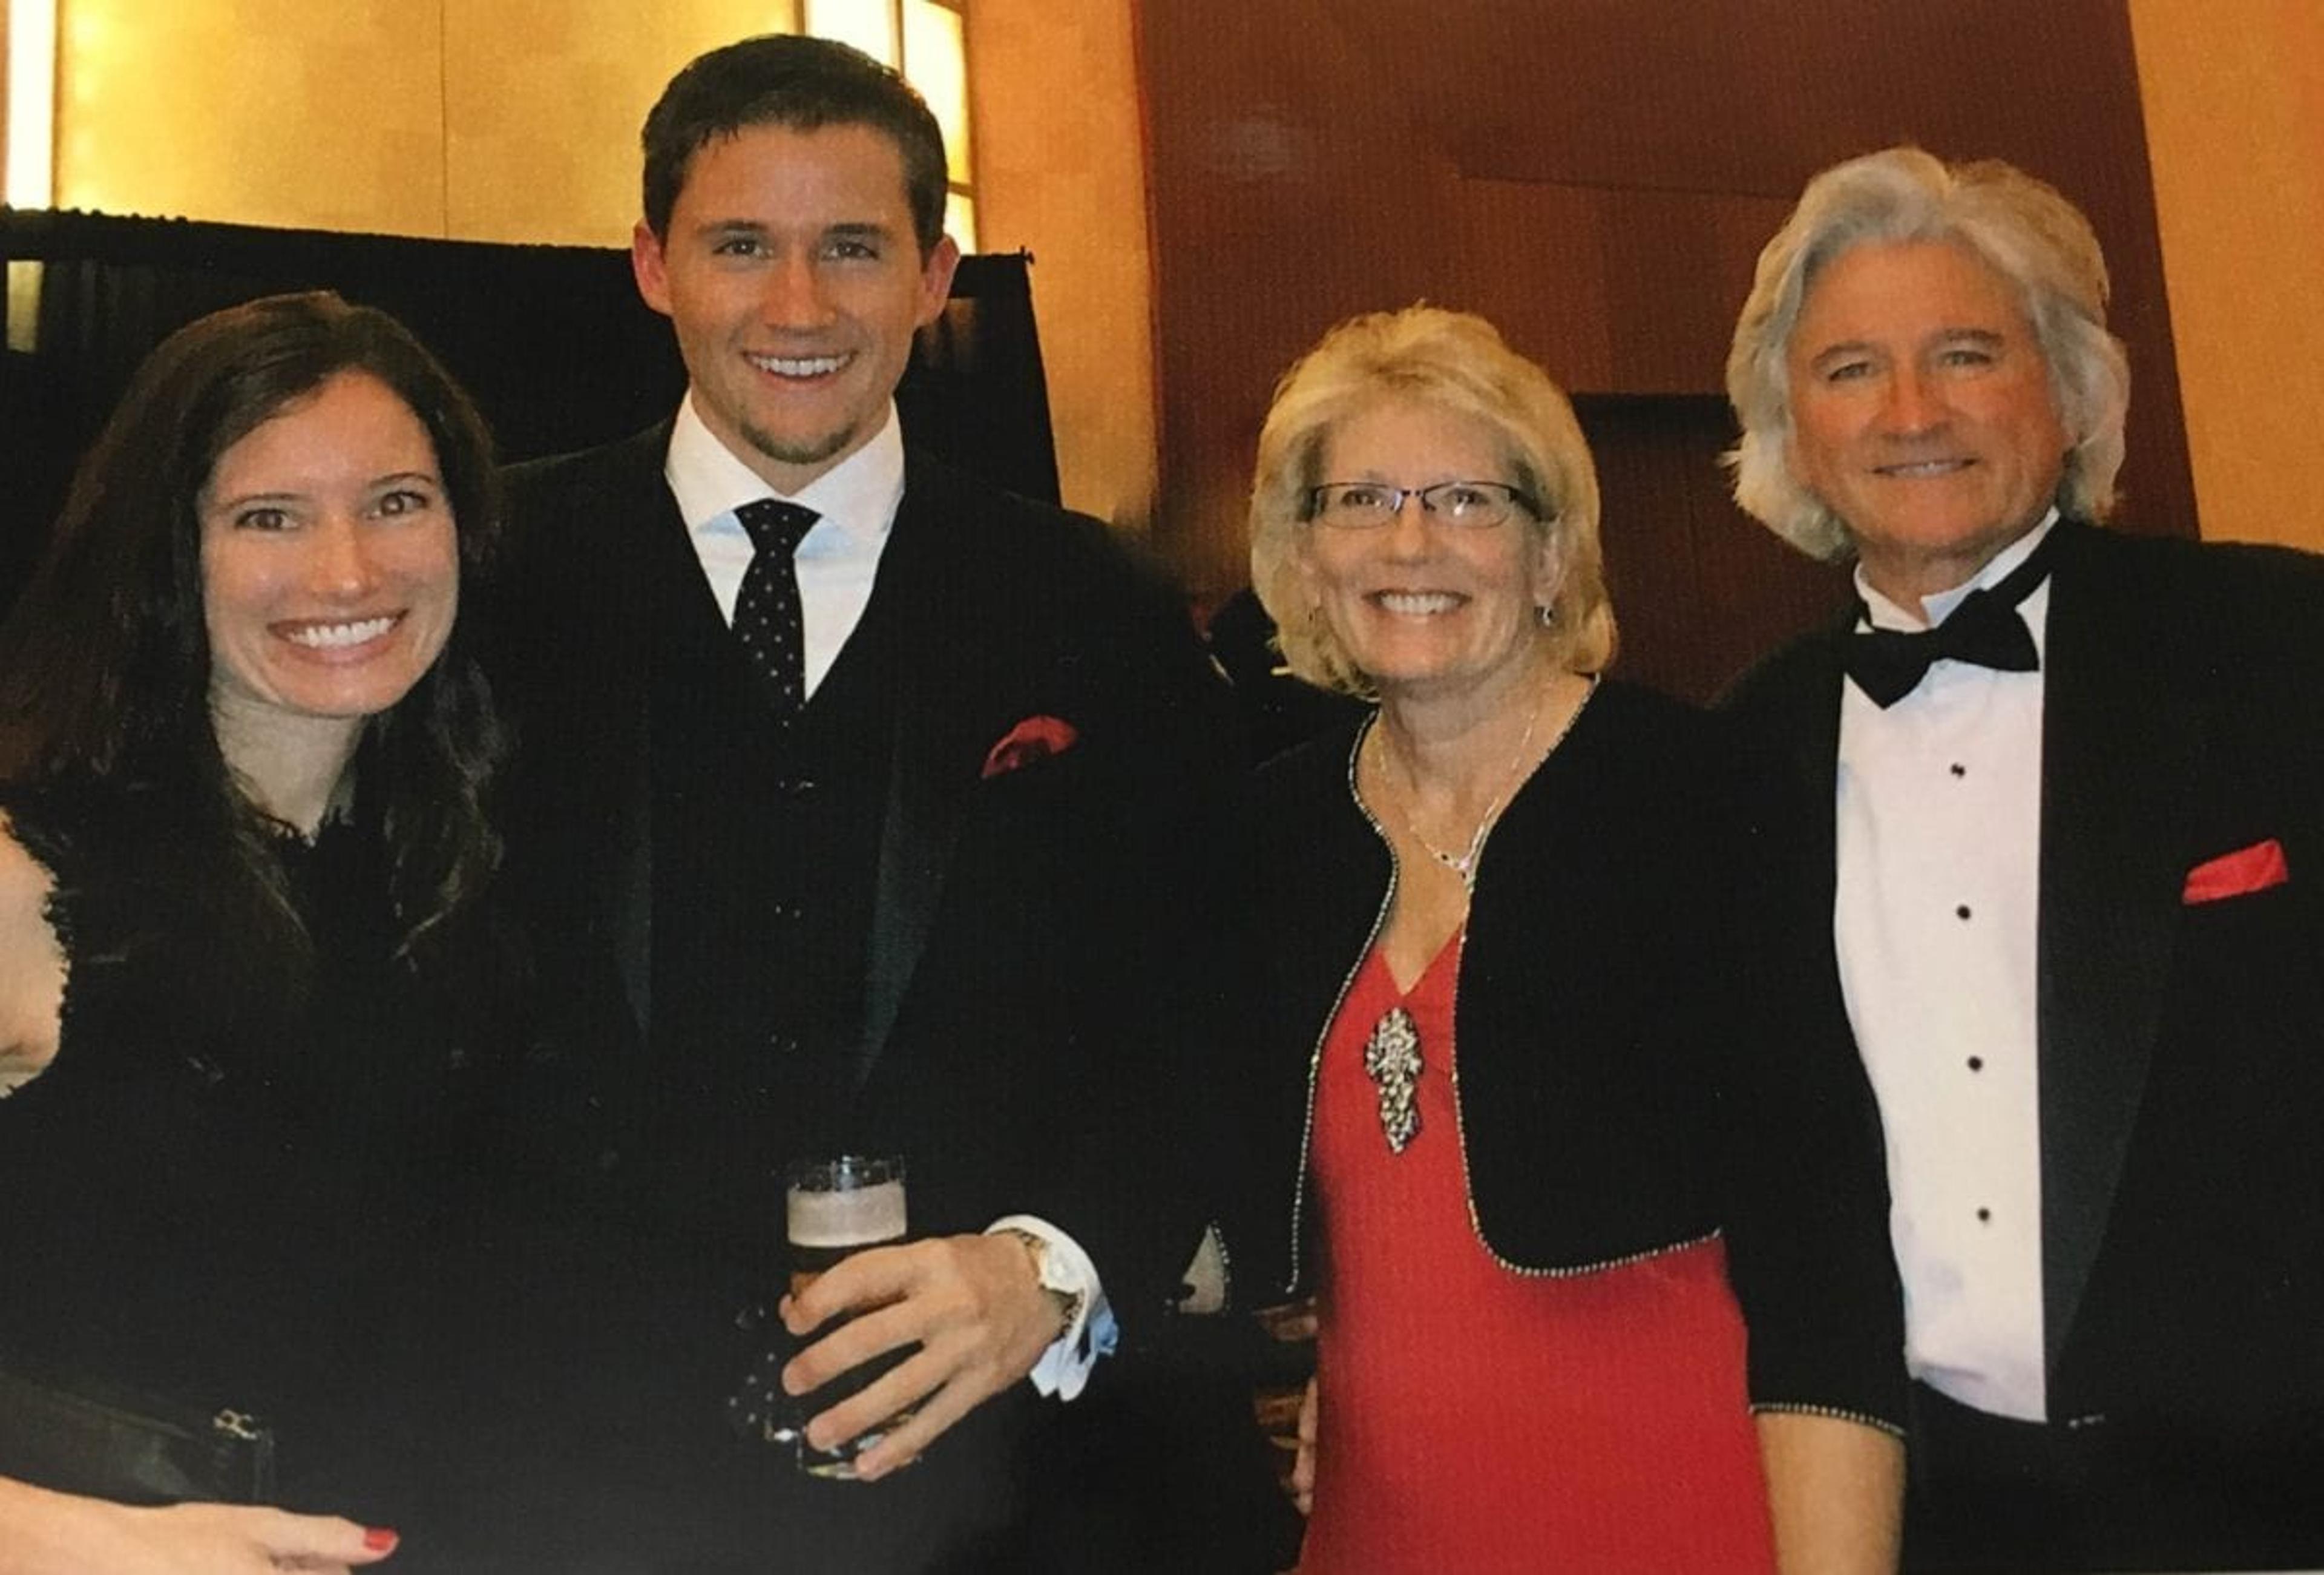 Sue VanDyk with her family, daughter Caitlin, son Ryan, and husband Tom at the West Michigan Heart Ball. 